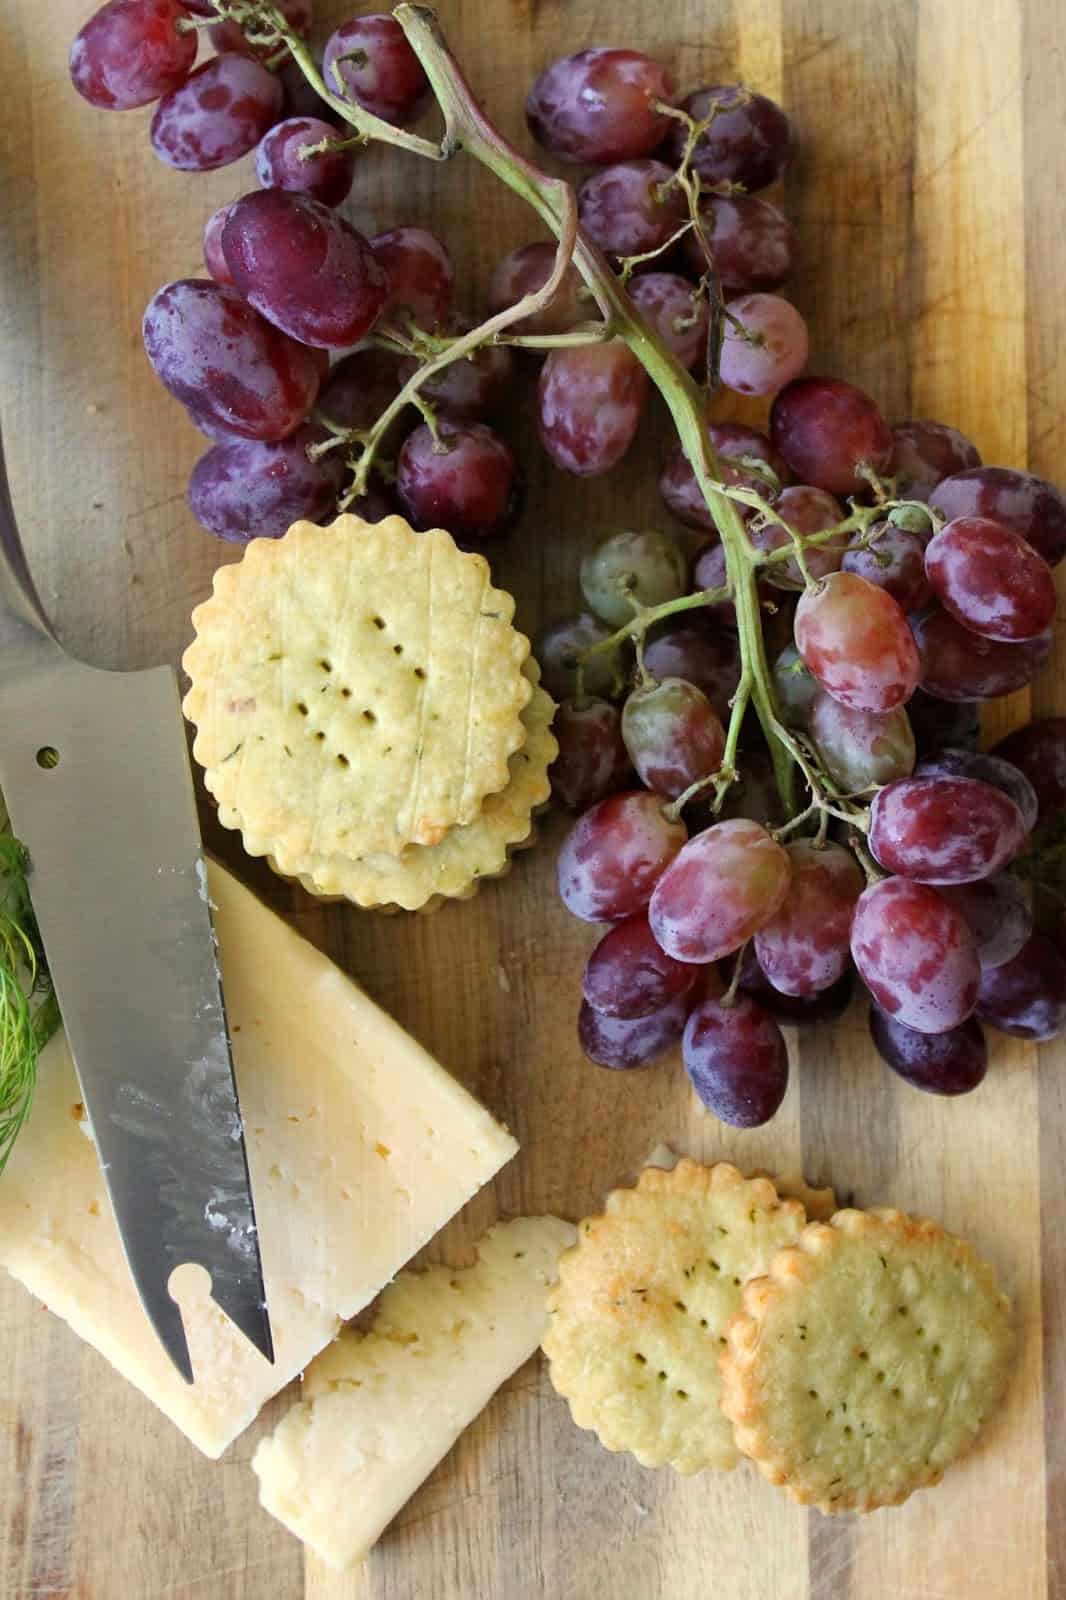 Cheese wafers, grapes and a block of cheese on a wooden board.